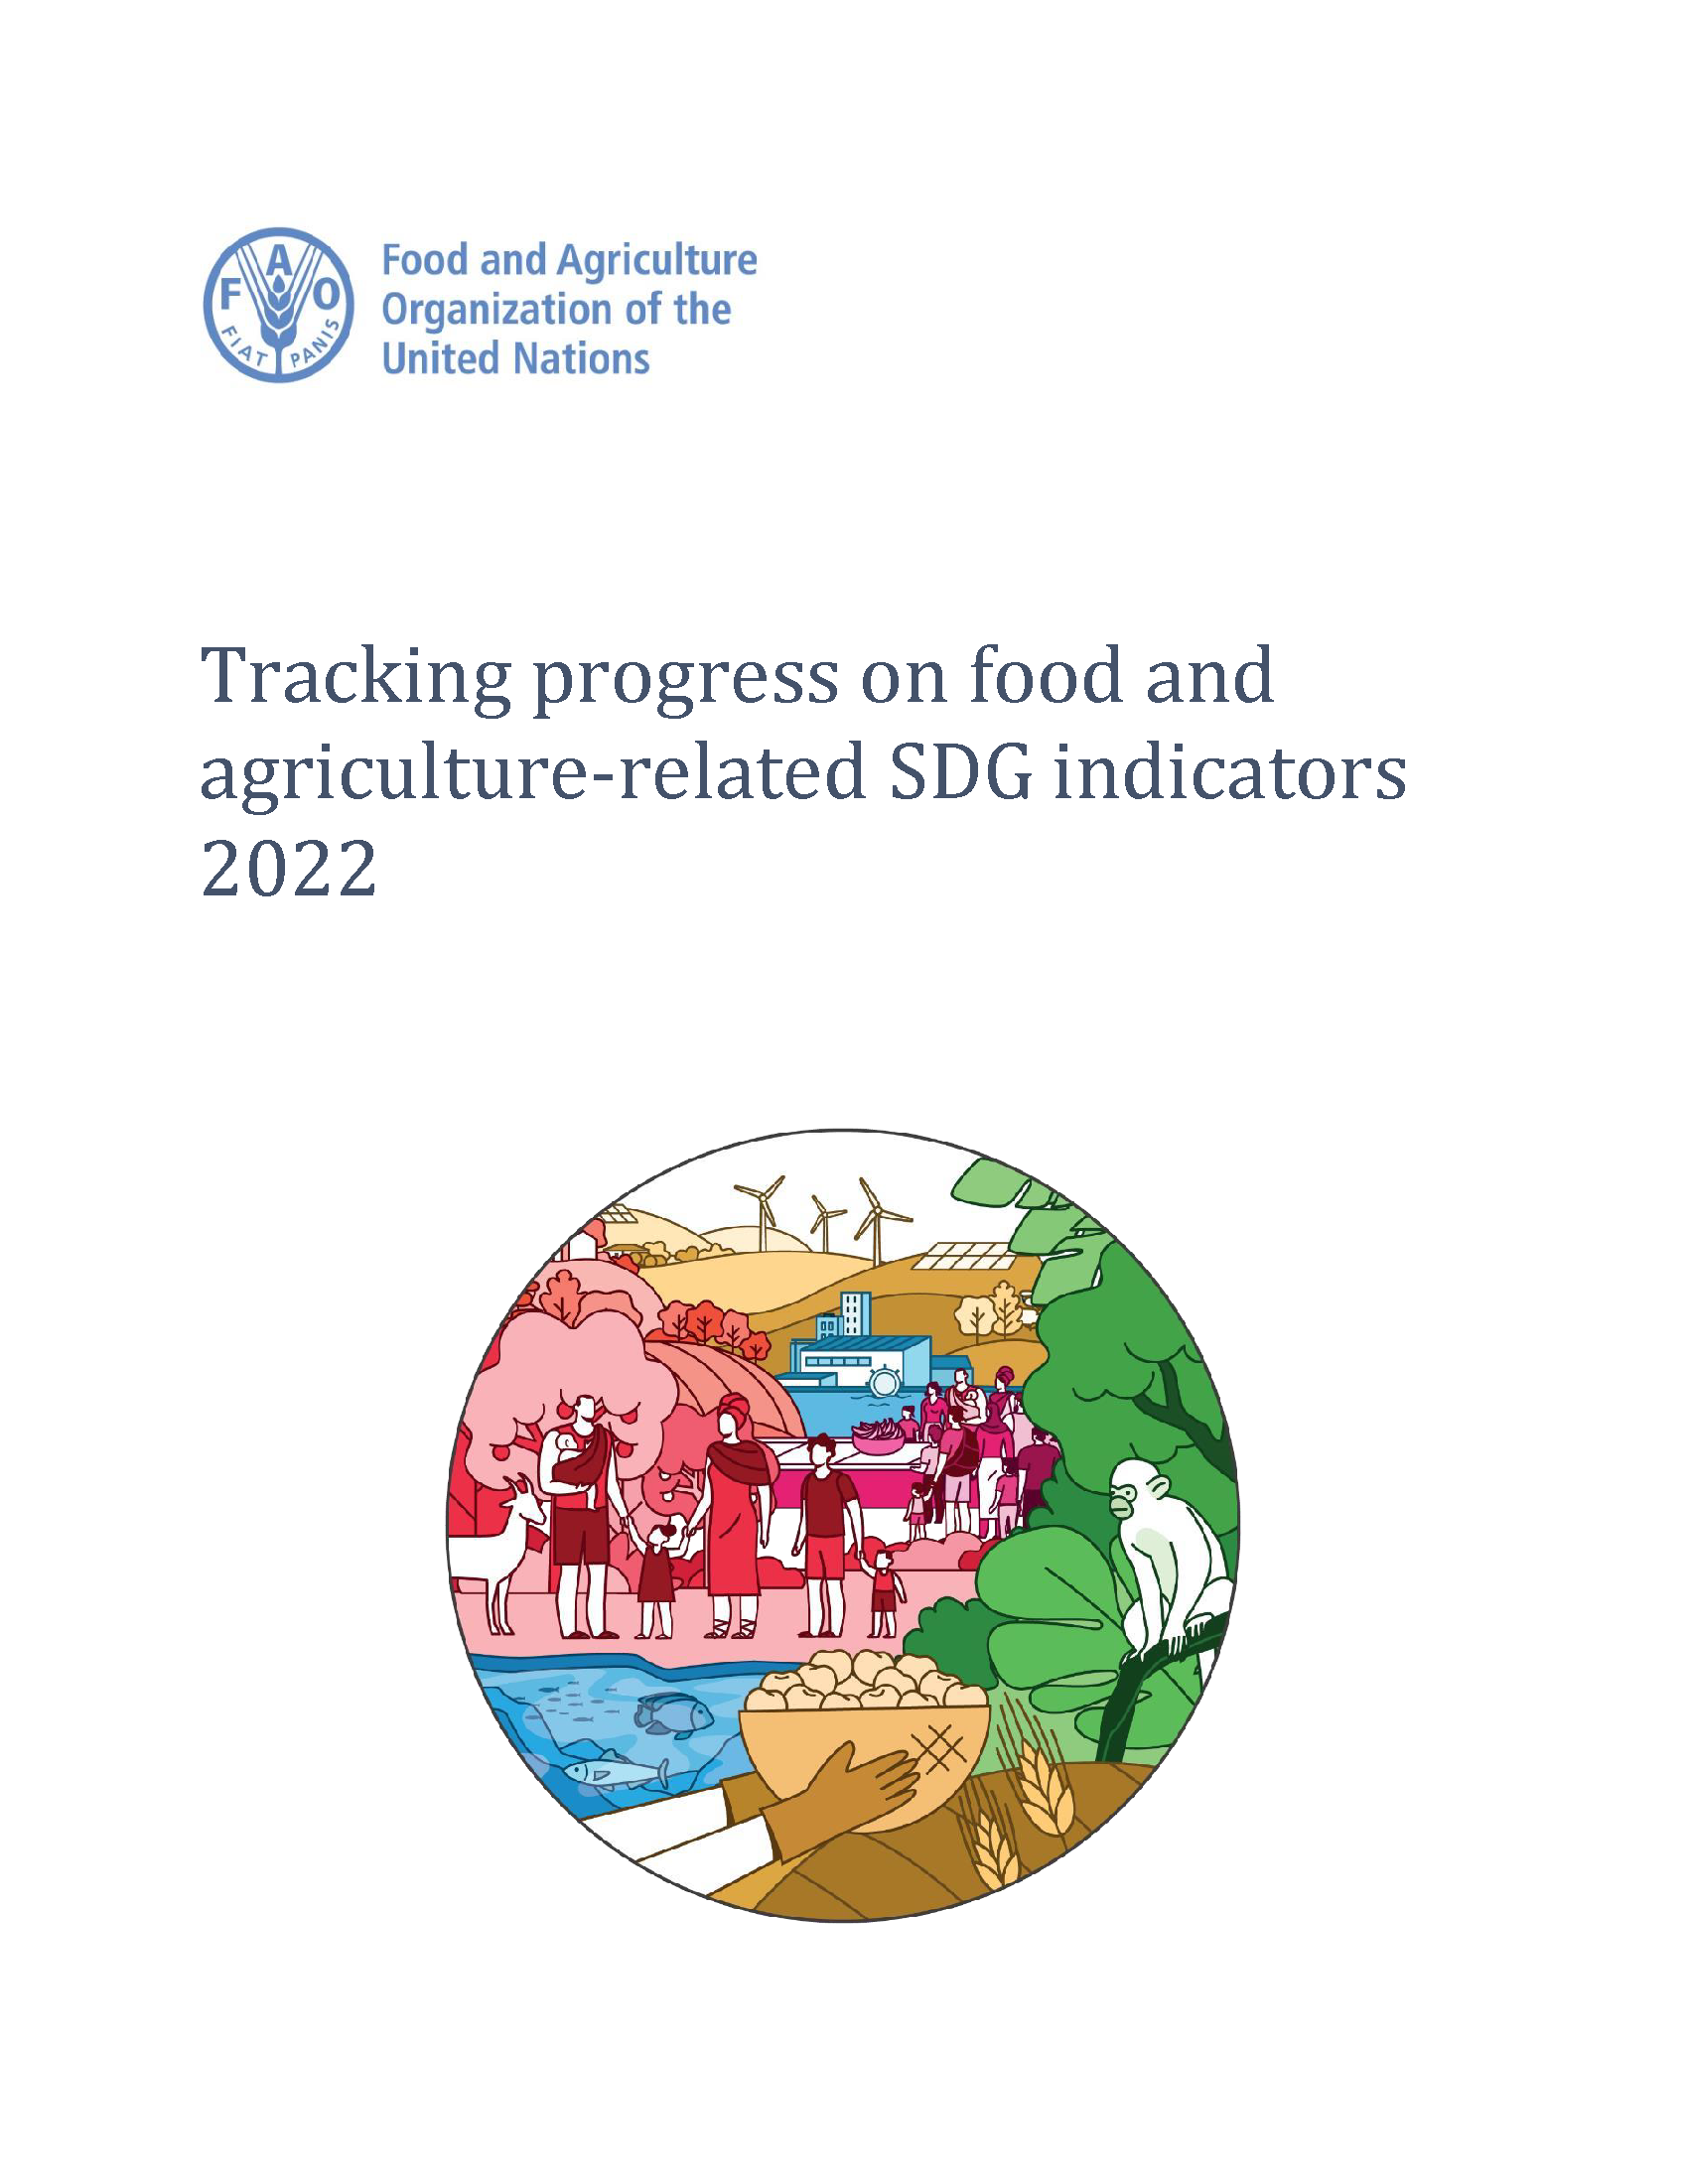 Cover page for Tracking Progress on Food and Agriculture-related SDG Indicators 2022